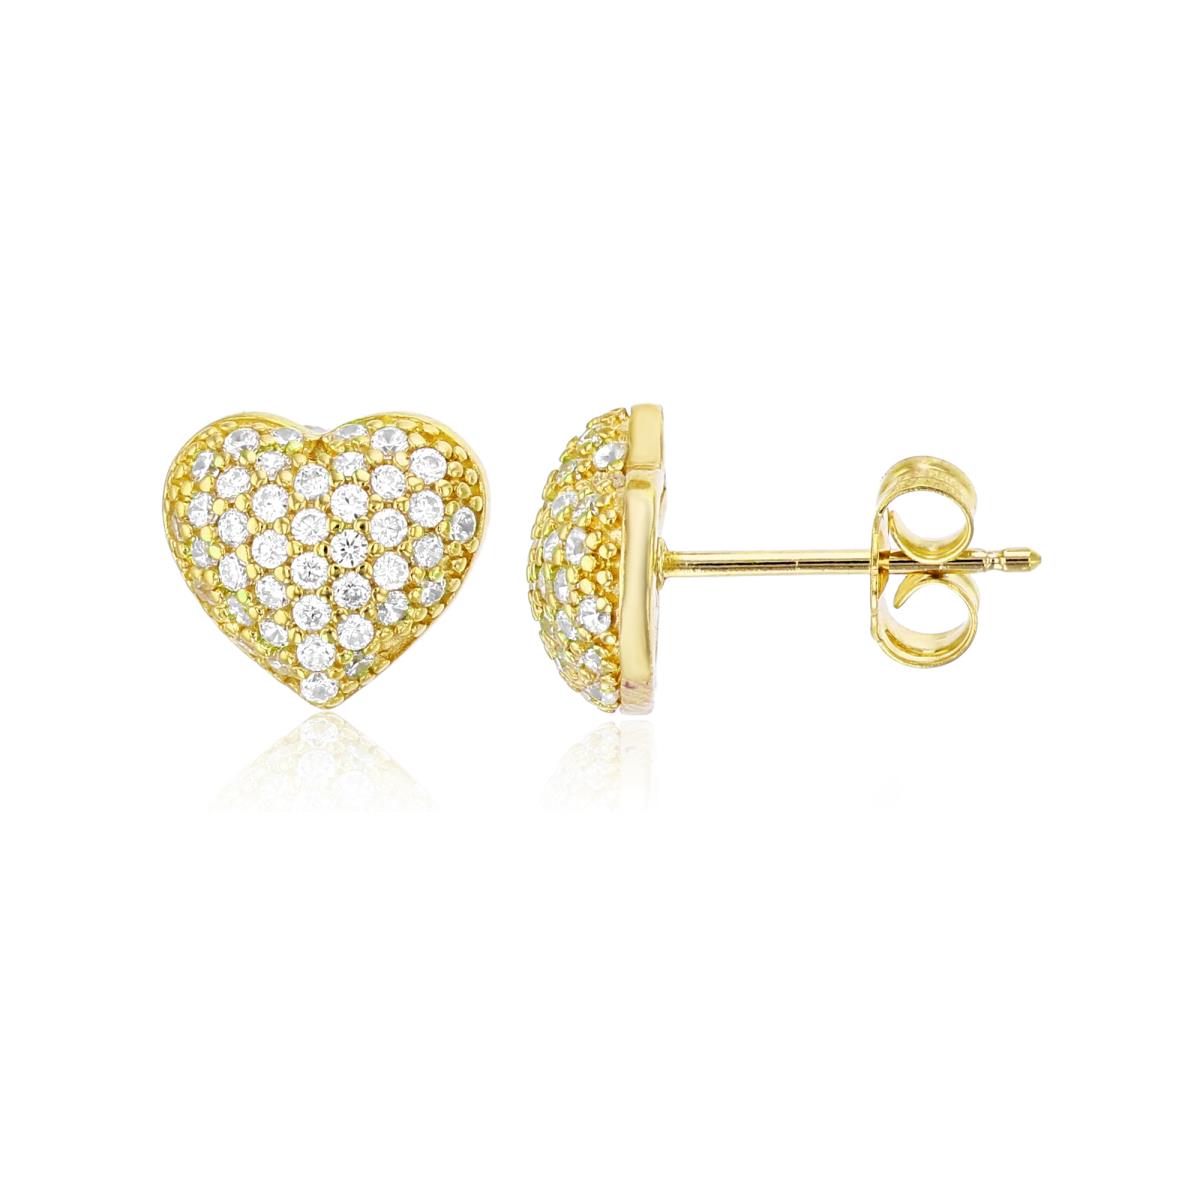 Sterling Silver Yellow 10x9mm Micropave Puffed Heart Stud Earring